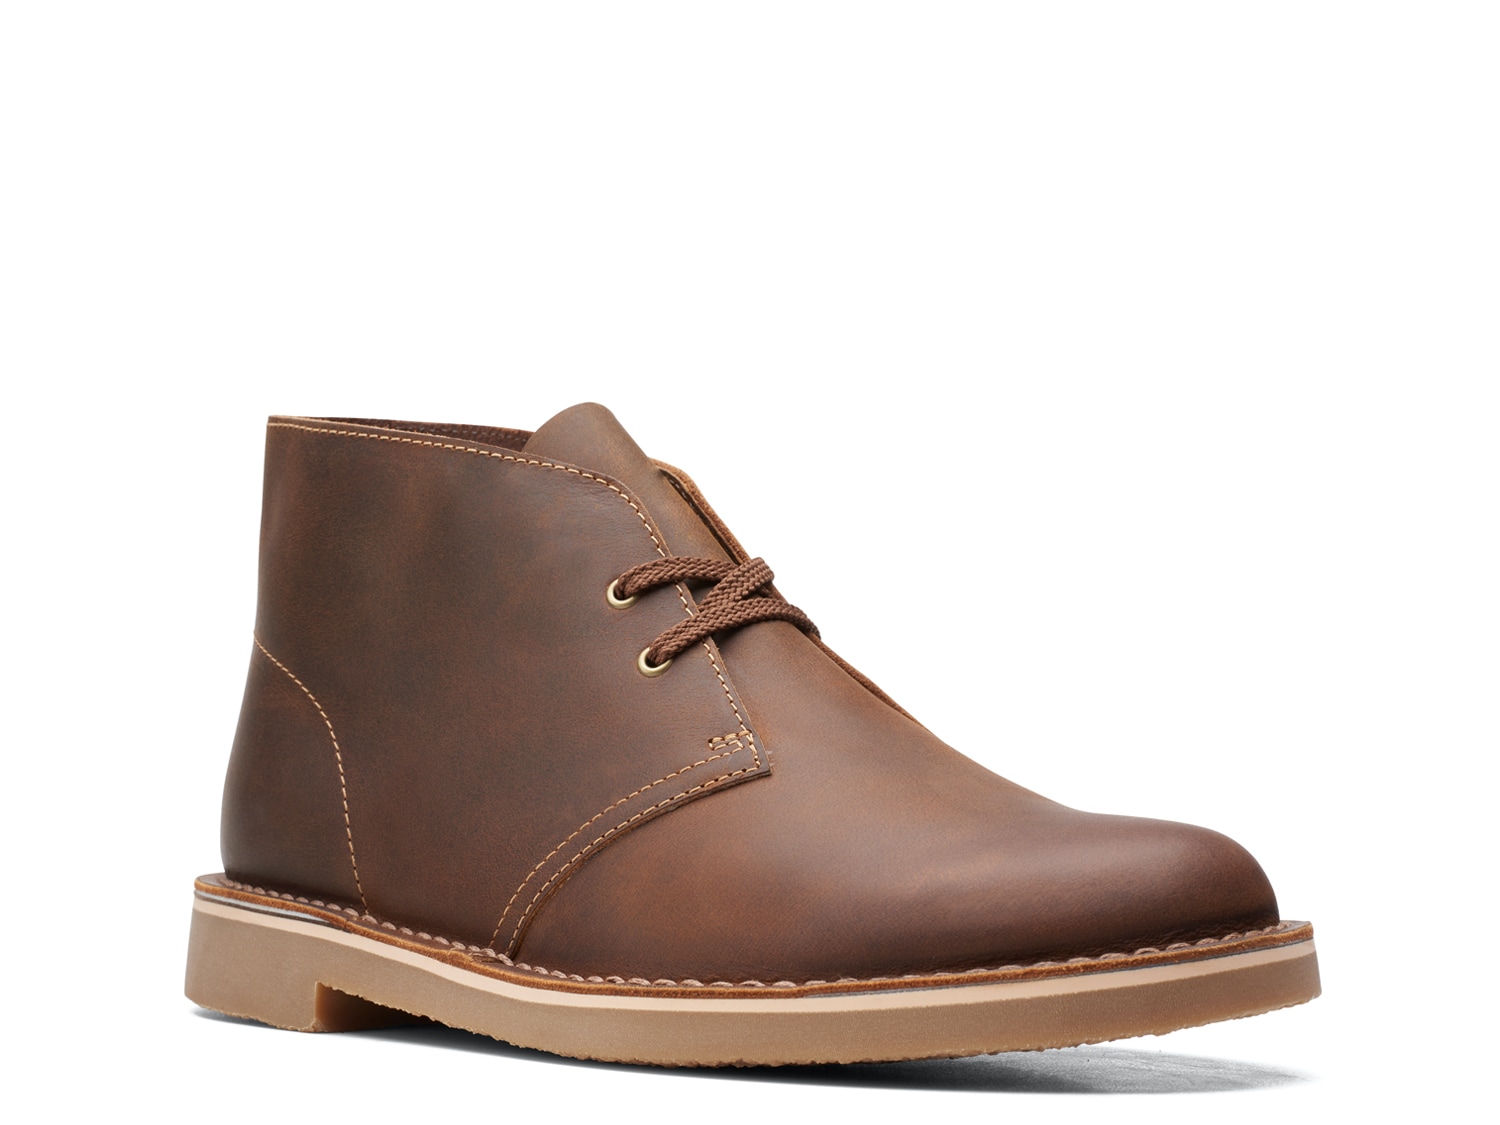 clarks bushacre suede chukka boot